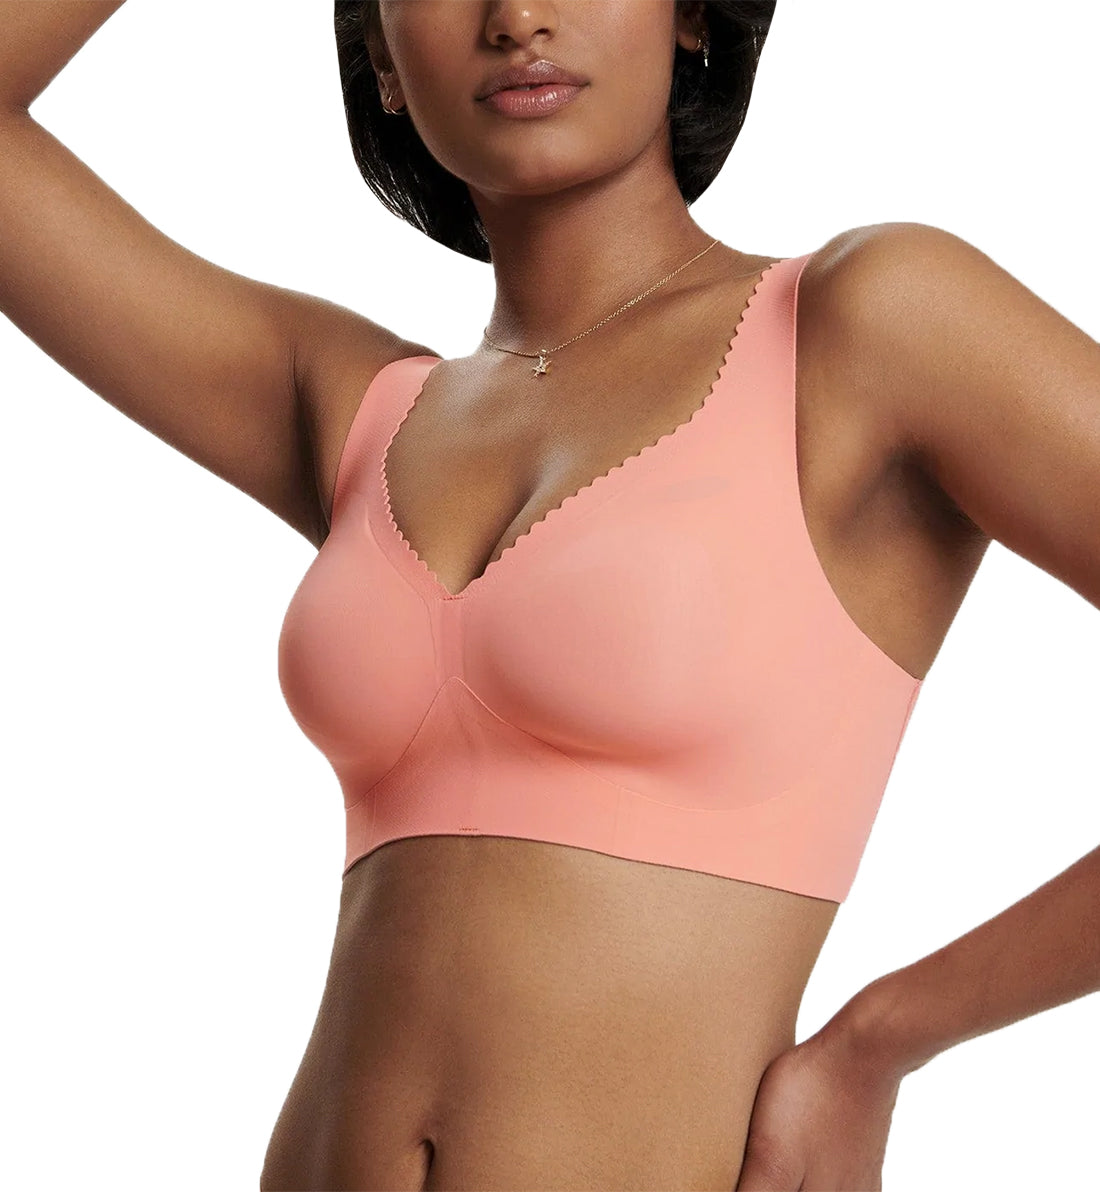 Evelyn &amp; Bobbie EVELYN Deep V-Neck Bralette (1834),Small,Coral - Coral,Small